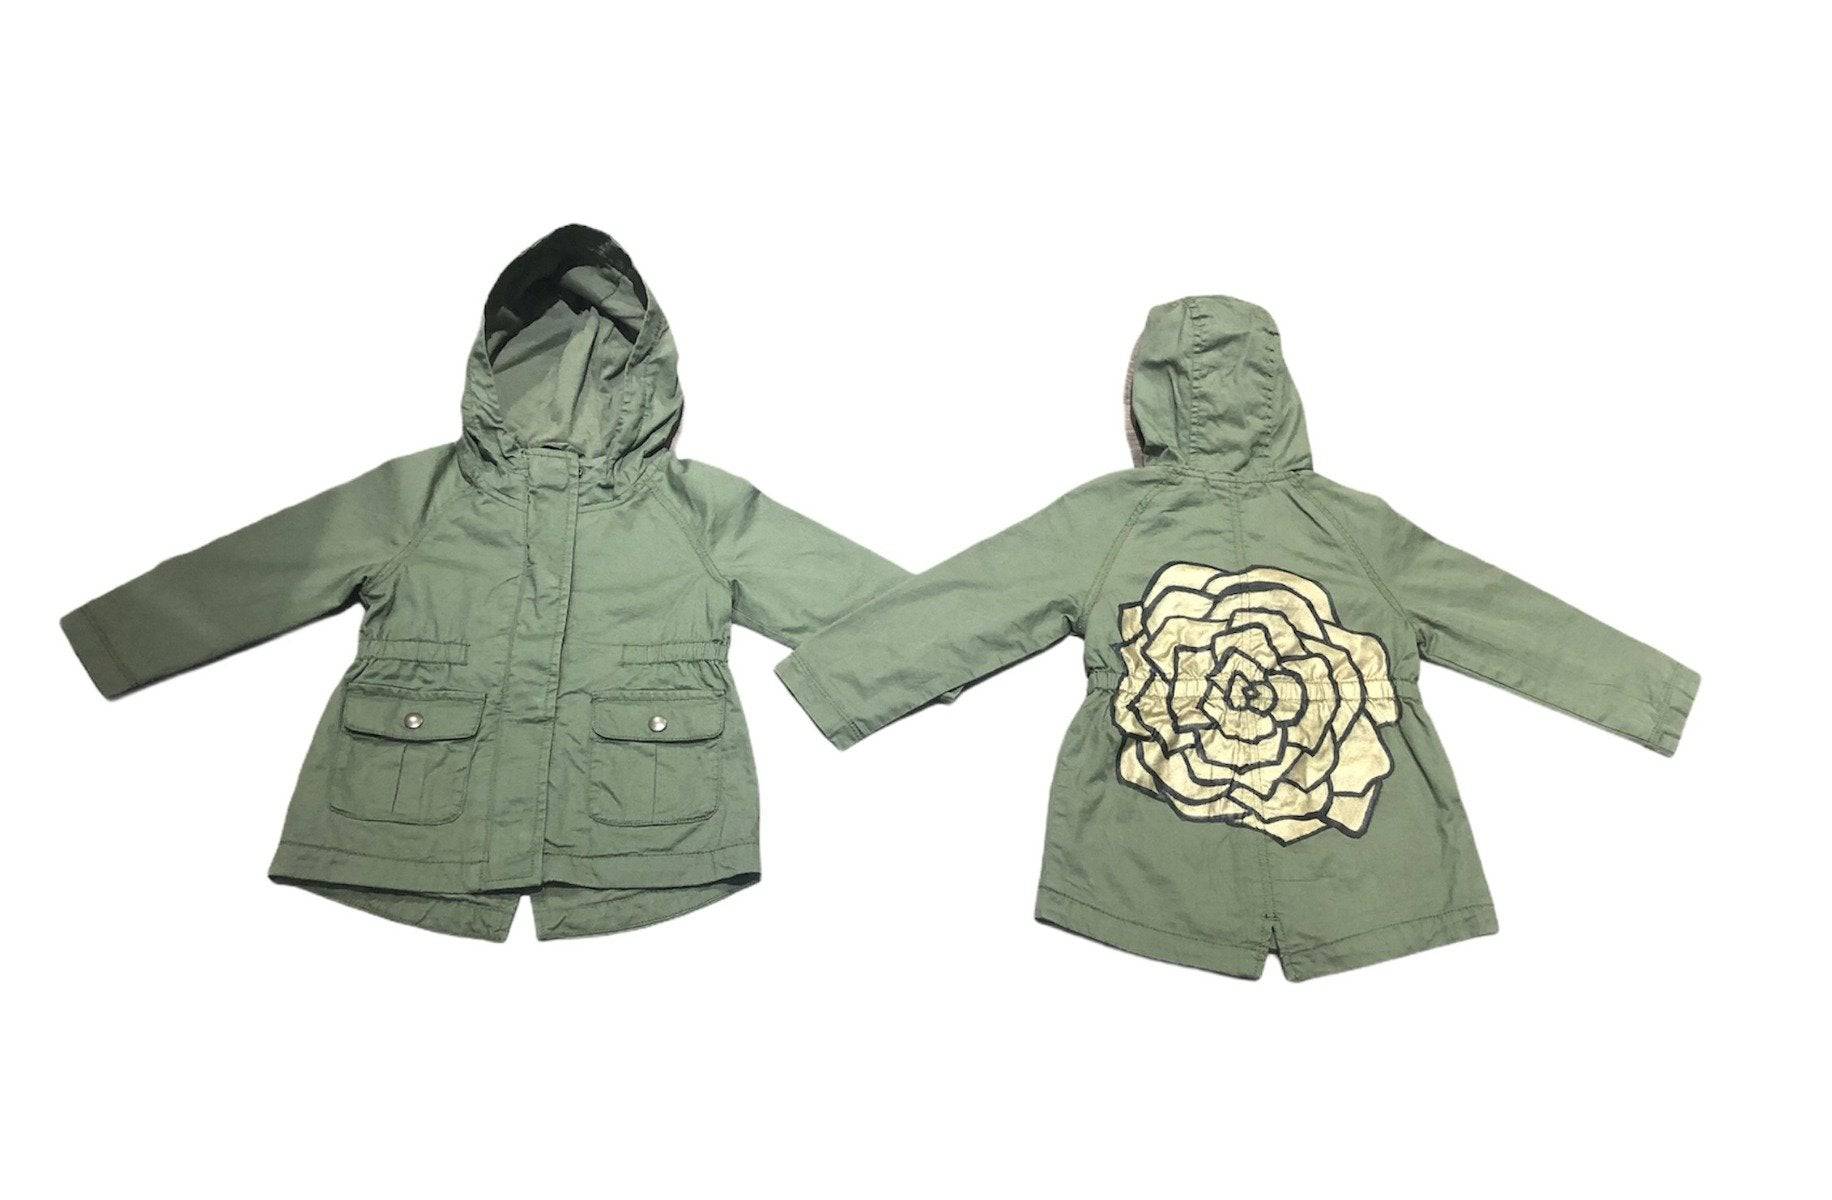 Hand Painted Limited Edition Flower Cargo Jacket - Twinkle Twinkle Little One